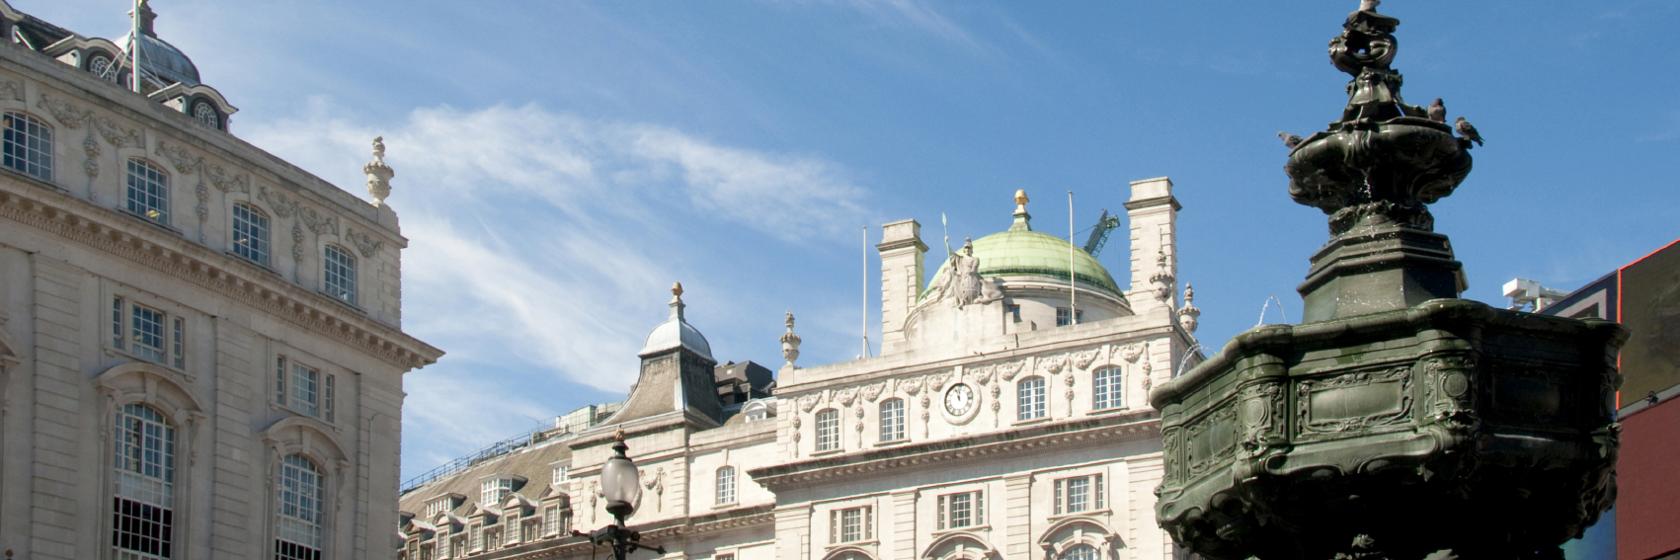 Piccadilly Circus, London Hotels